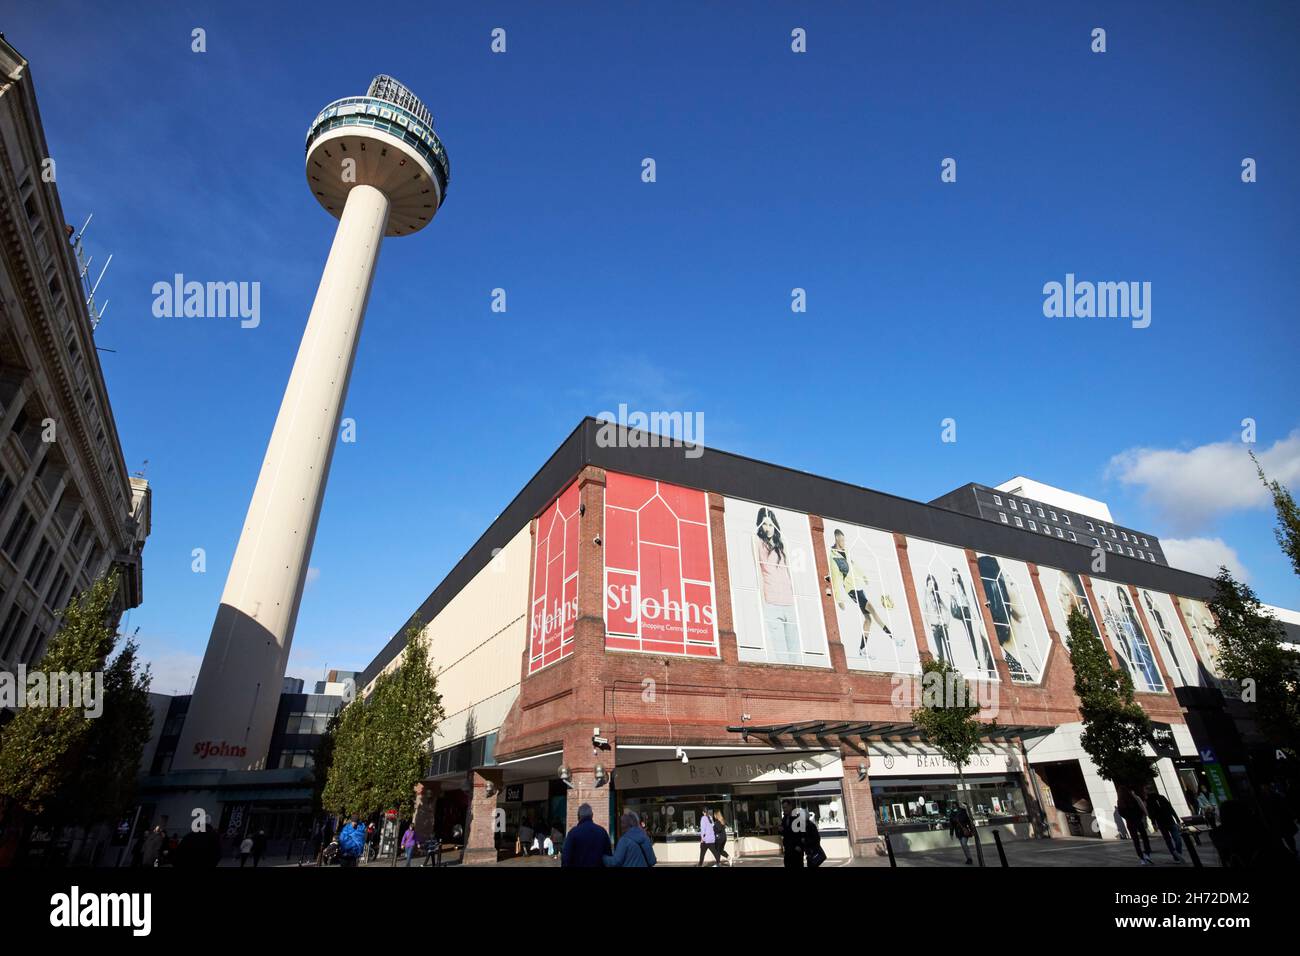 centro commerciale st johns e radio City Tower liverpool City Centre Liverpool merseyside uk Foto Stock